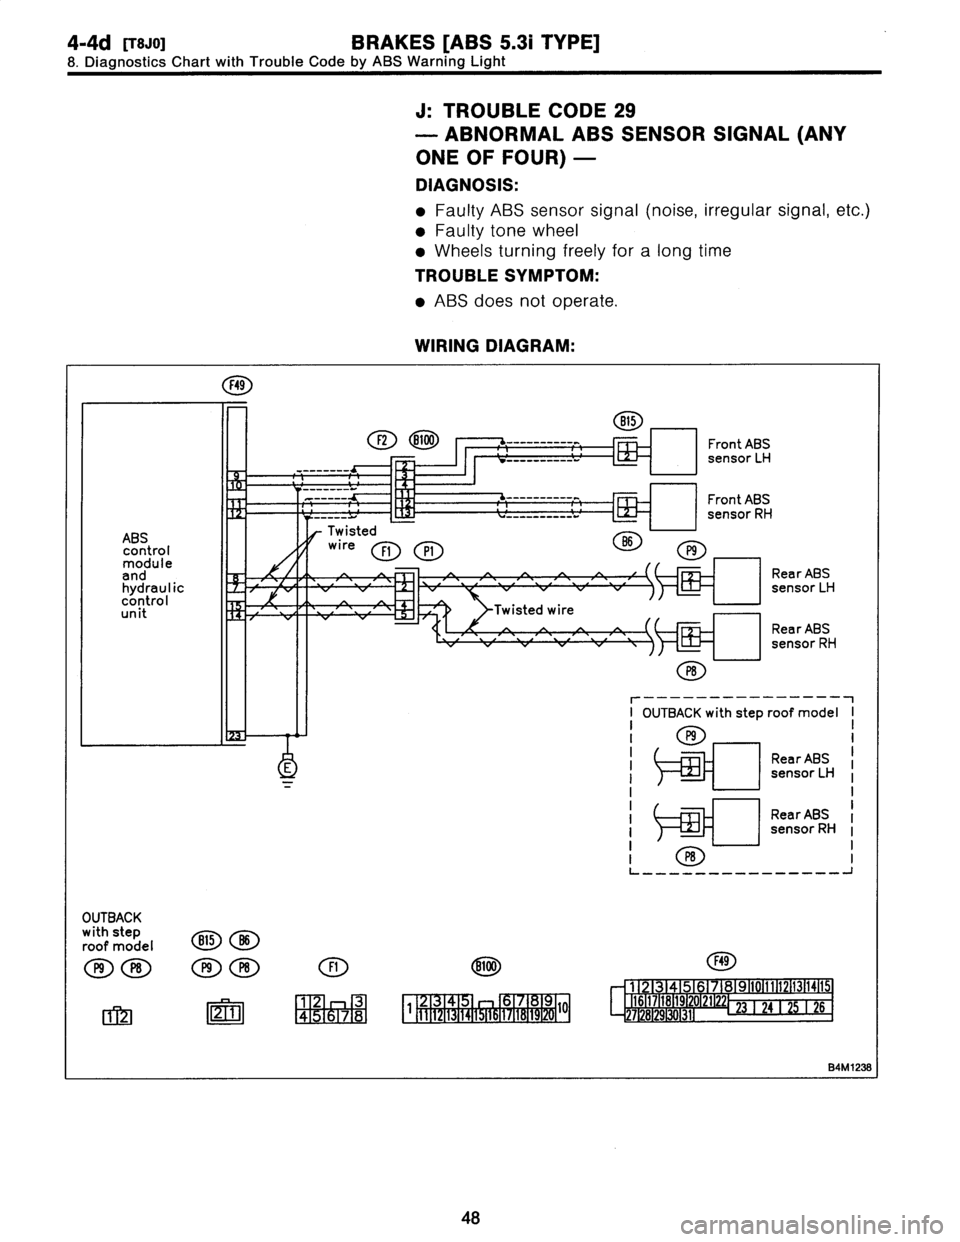 SUBARU LEGACY 1997  Service Repair Manual 
4-4d
[Tsjo]
BRAKES
[ABS
5
.31
TYPE]

8
.
Diagnostics
Chart
with
Trouble
Code
by
ABS
Warning
Light

J
:
TROUBLE
CODE
29

-
ABNORMAL
ABS
SENSOR
SIGNAL
(ANY

ONE
OF
FOUR)
-

DIAGNOSIS
:

"
Faulty
AB